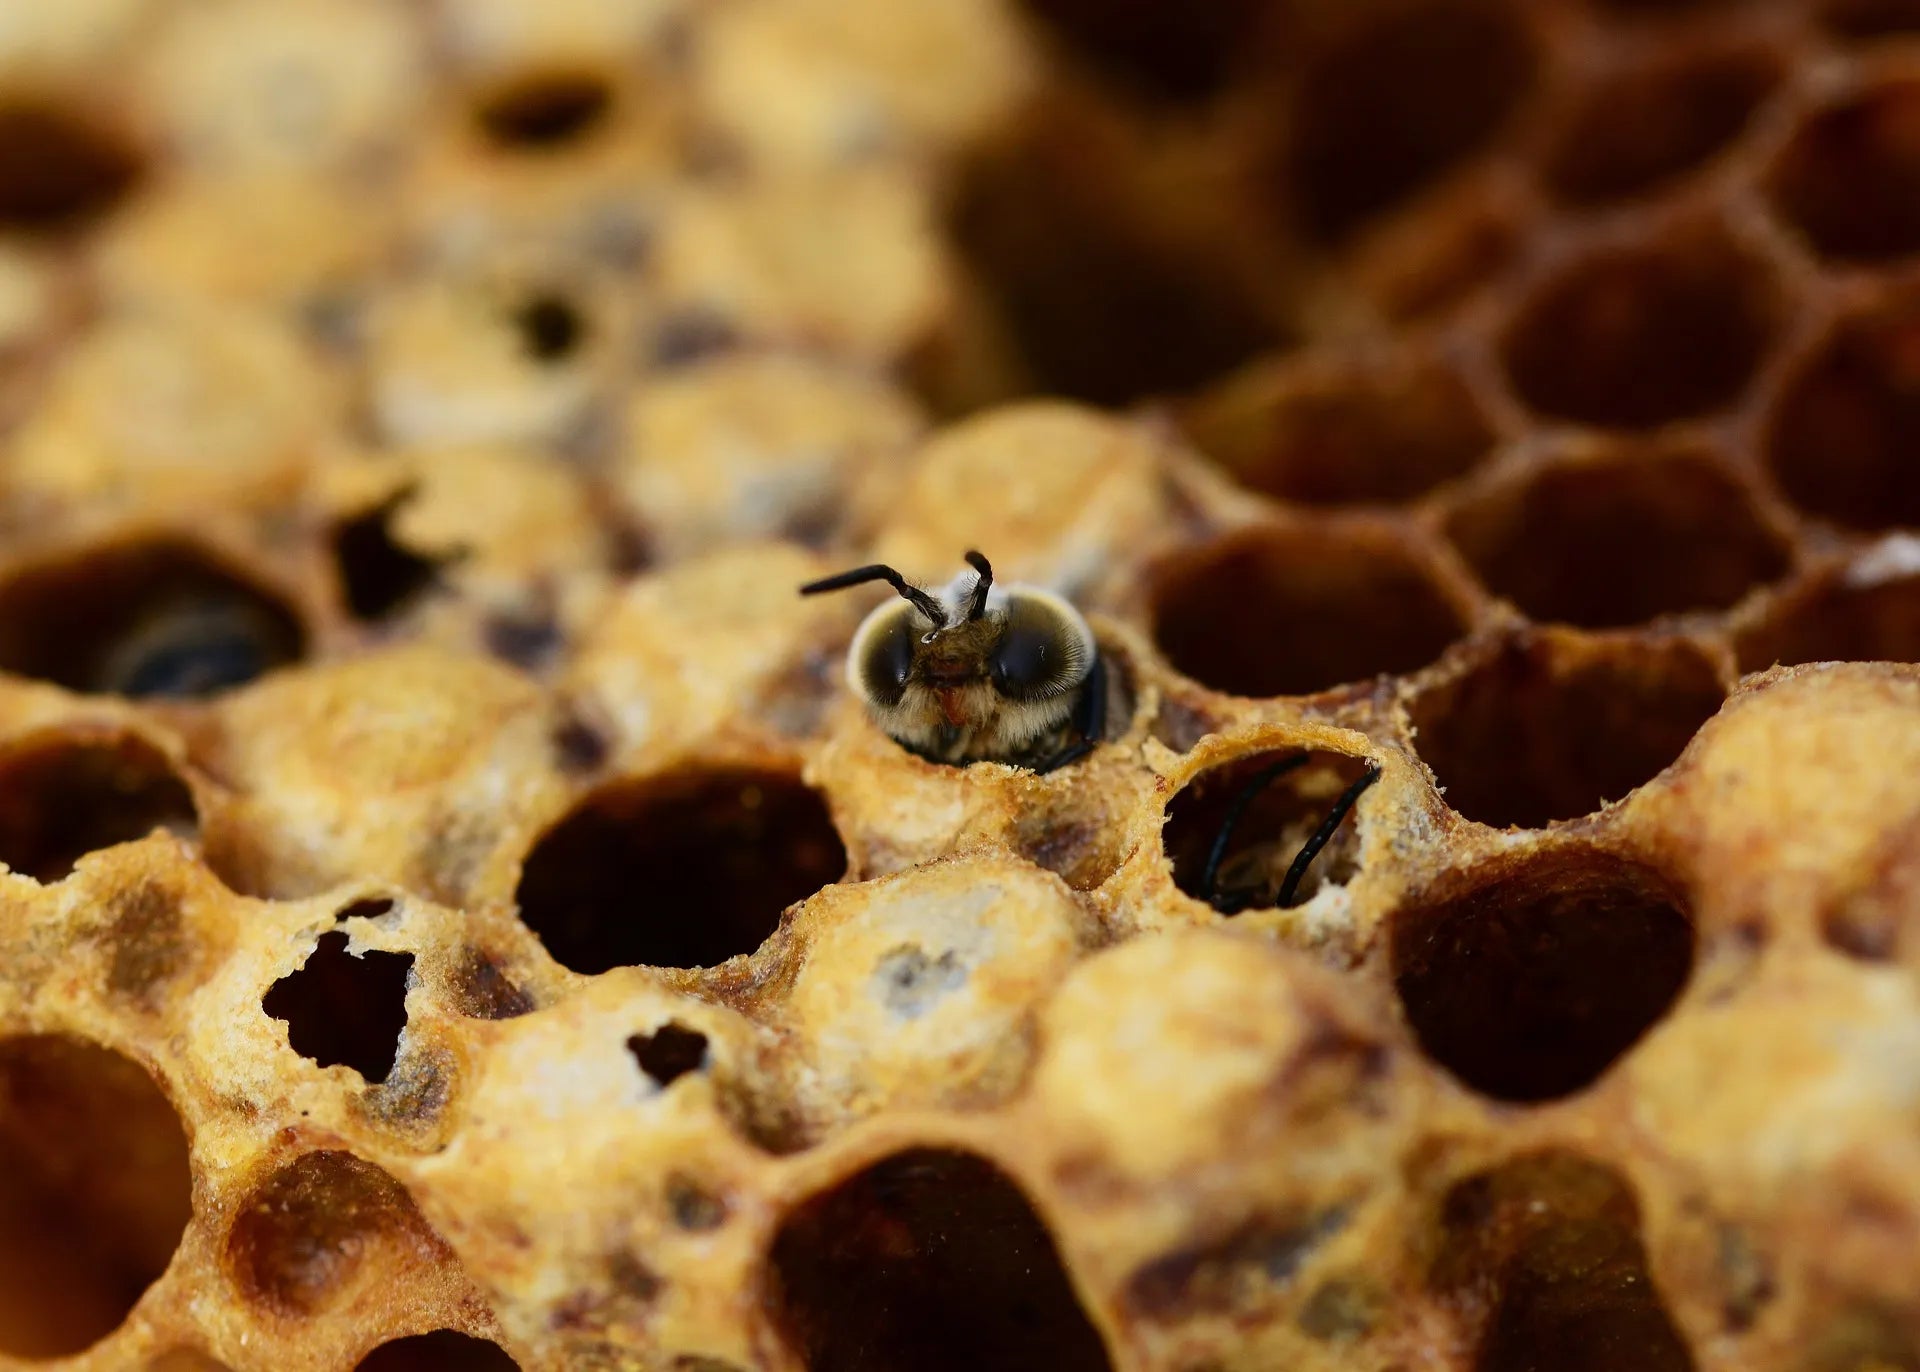 drone (male honey bee) hatching from a cell in a beehive. image by PollyDot